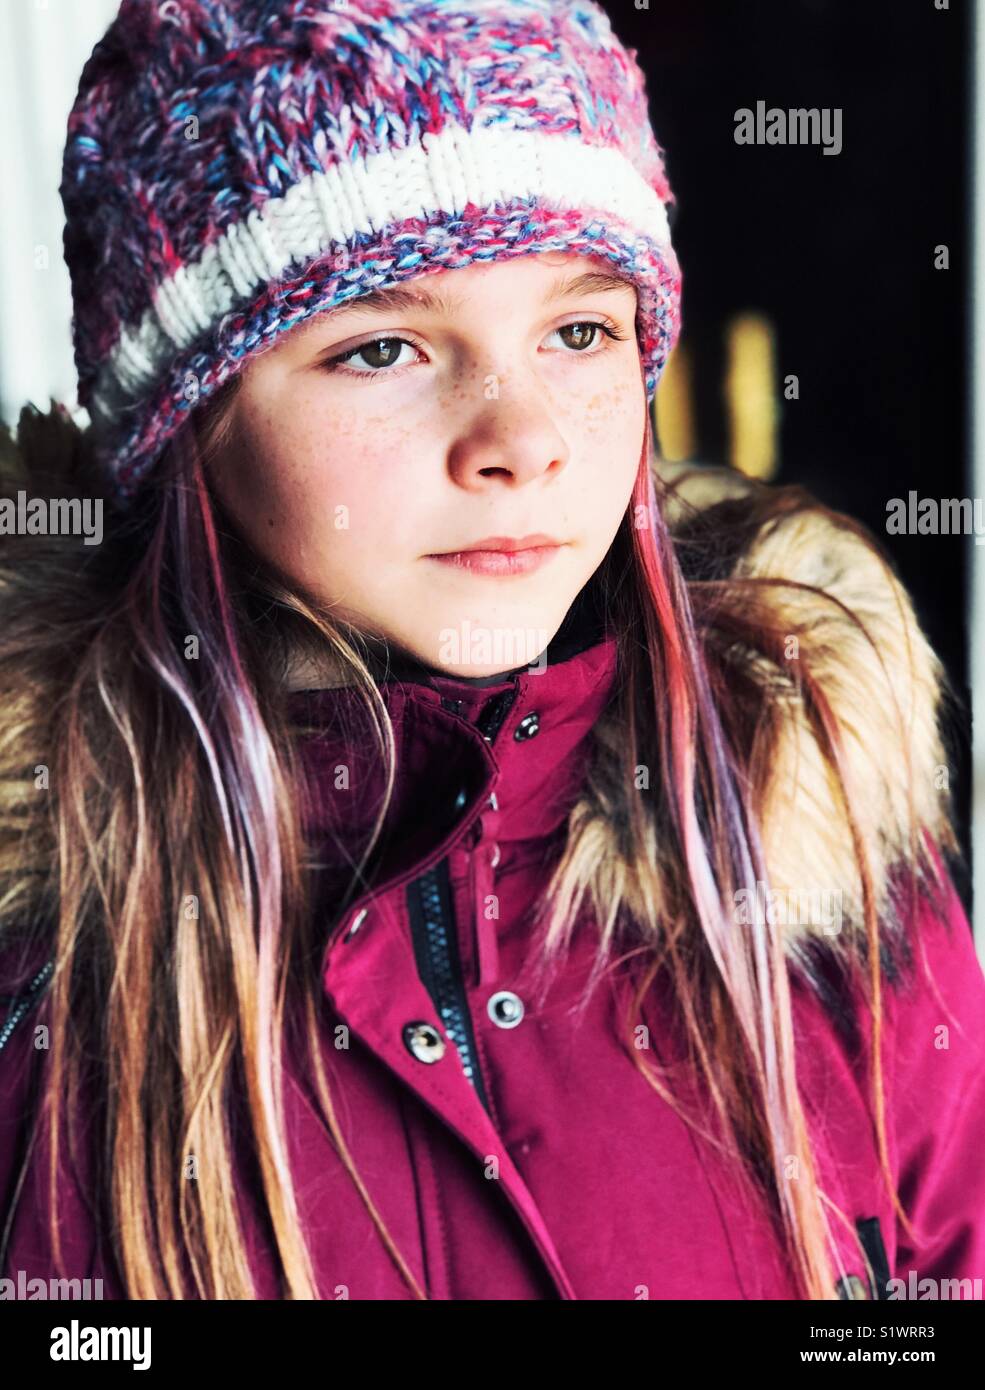 Portrait of 10 year old girl with purple hair streaks wearing winter coat and knit hat looking to the side Stock Photo